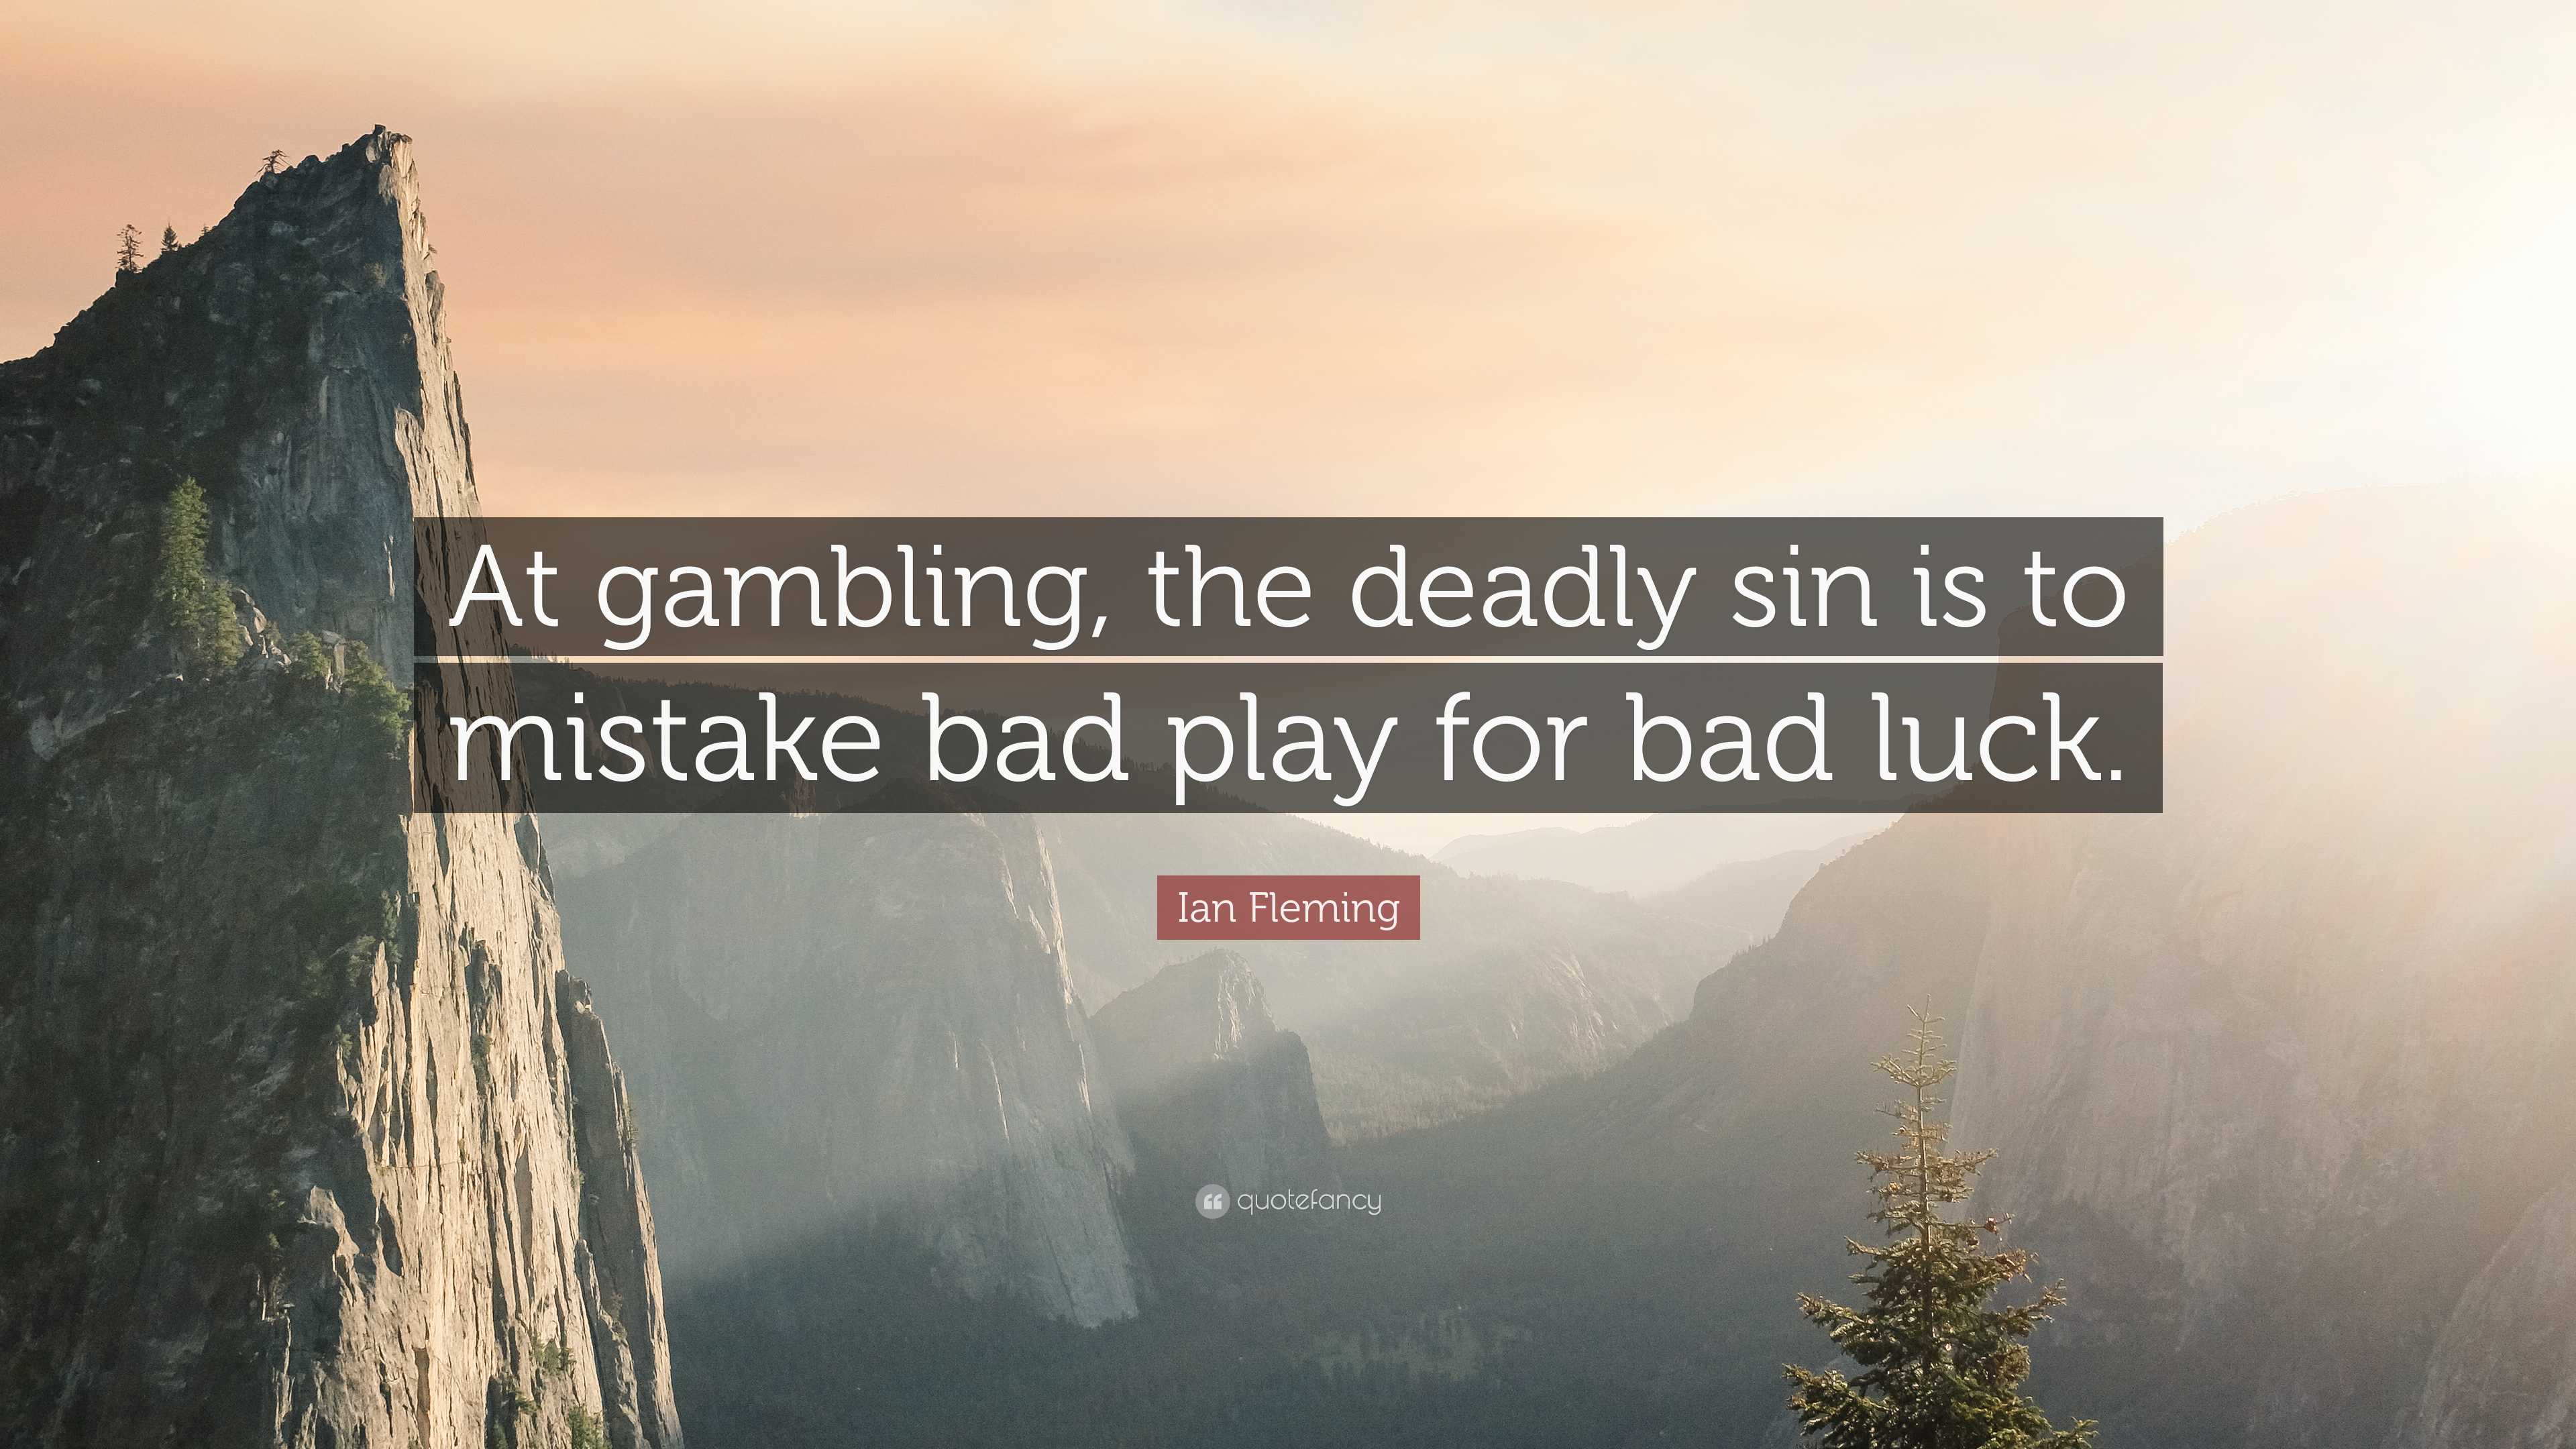 Lured into betting! A deadly mistake